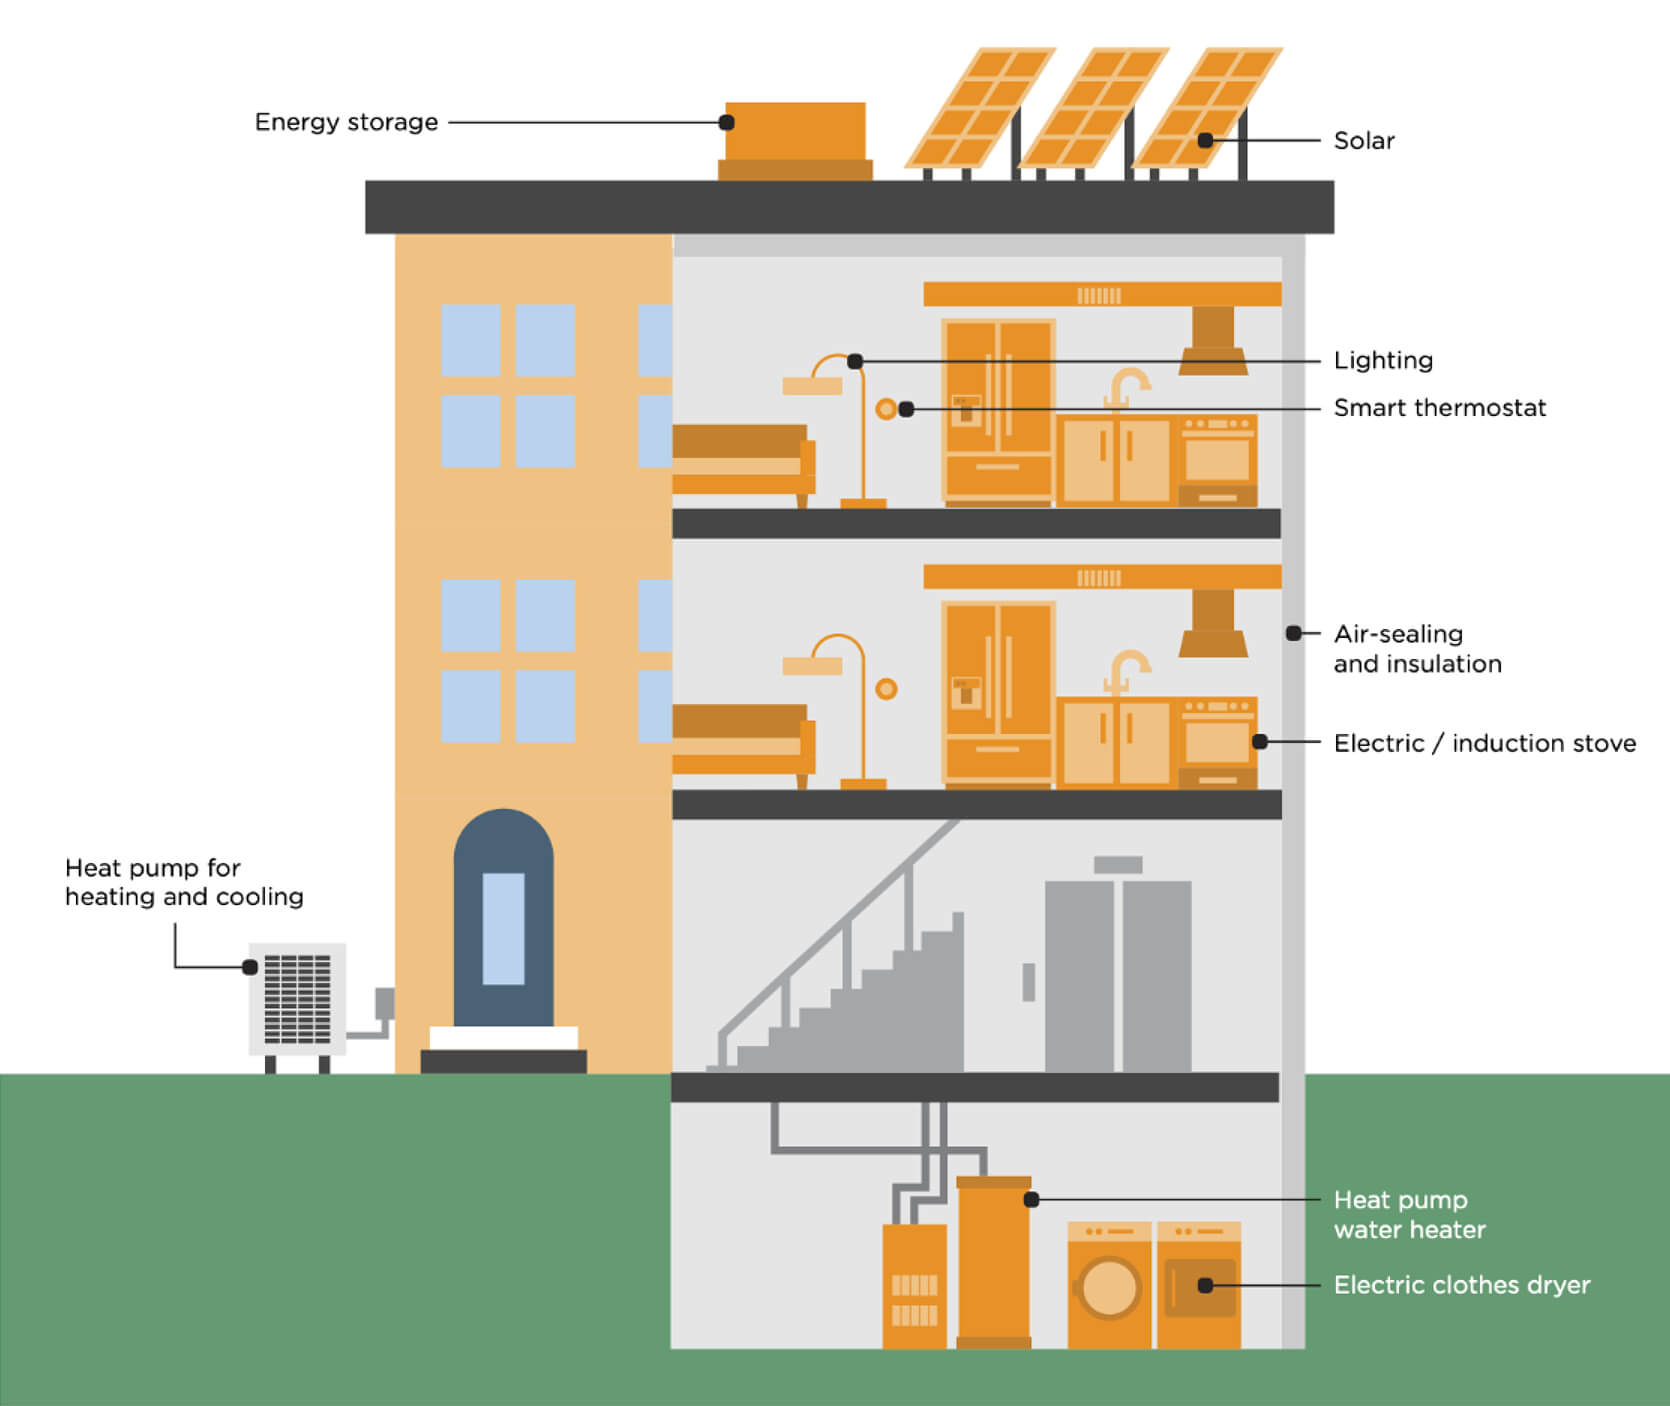 Examples of decarbonization measures in a multifamily building